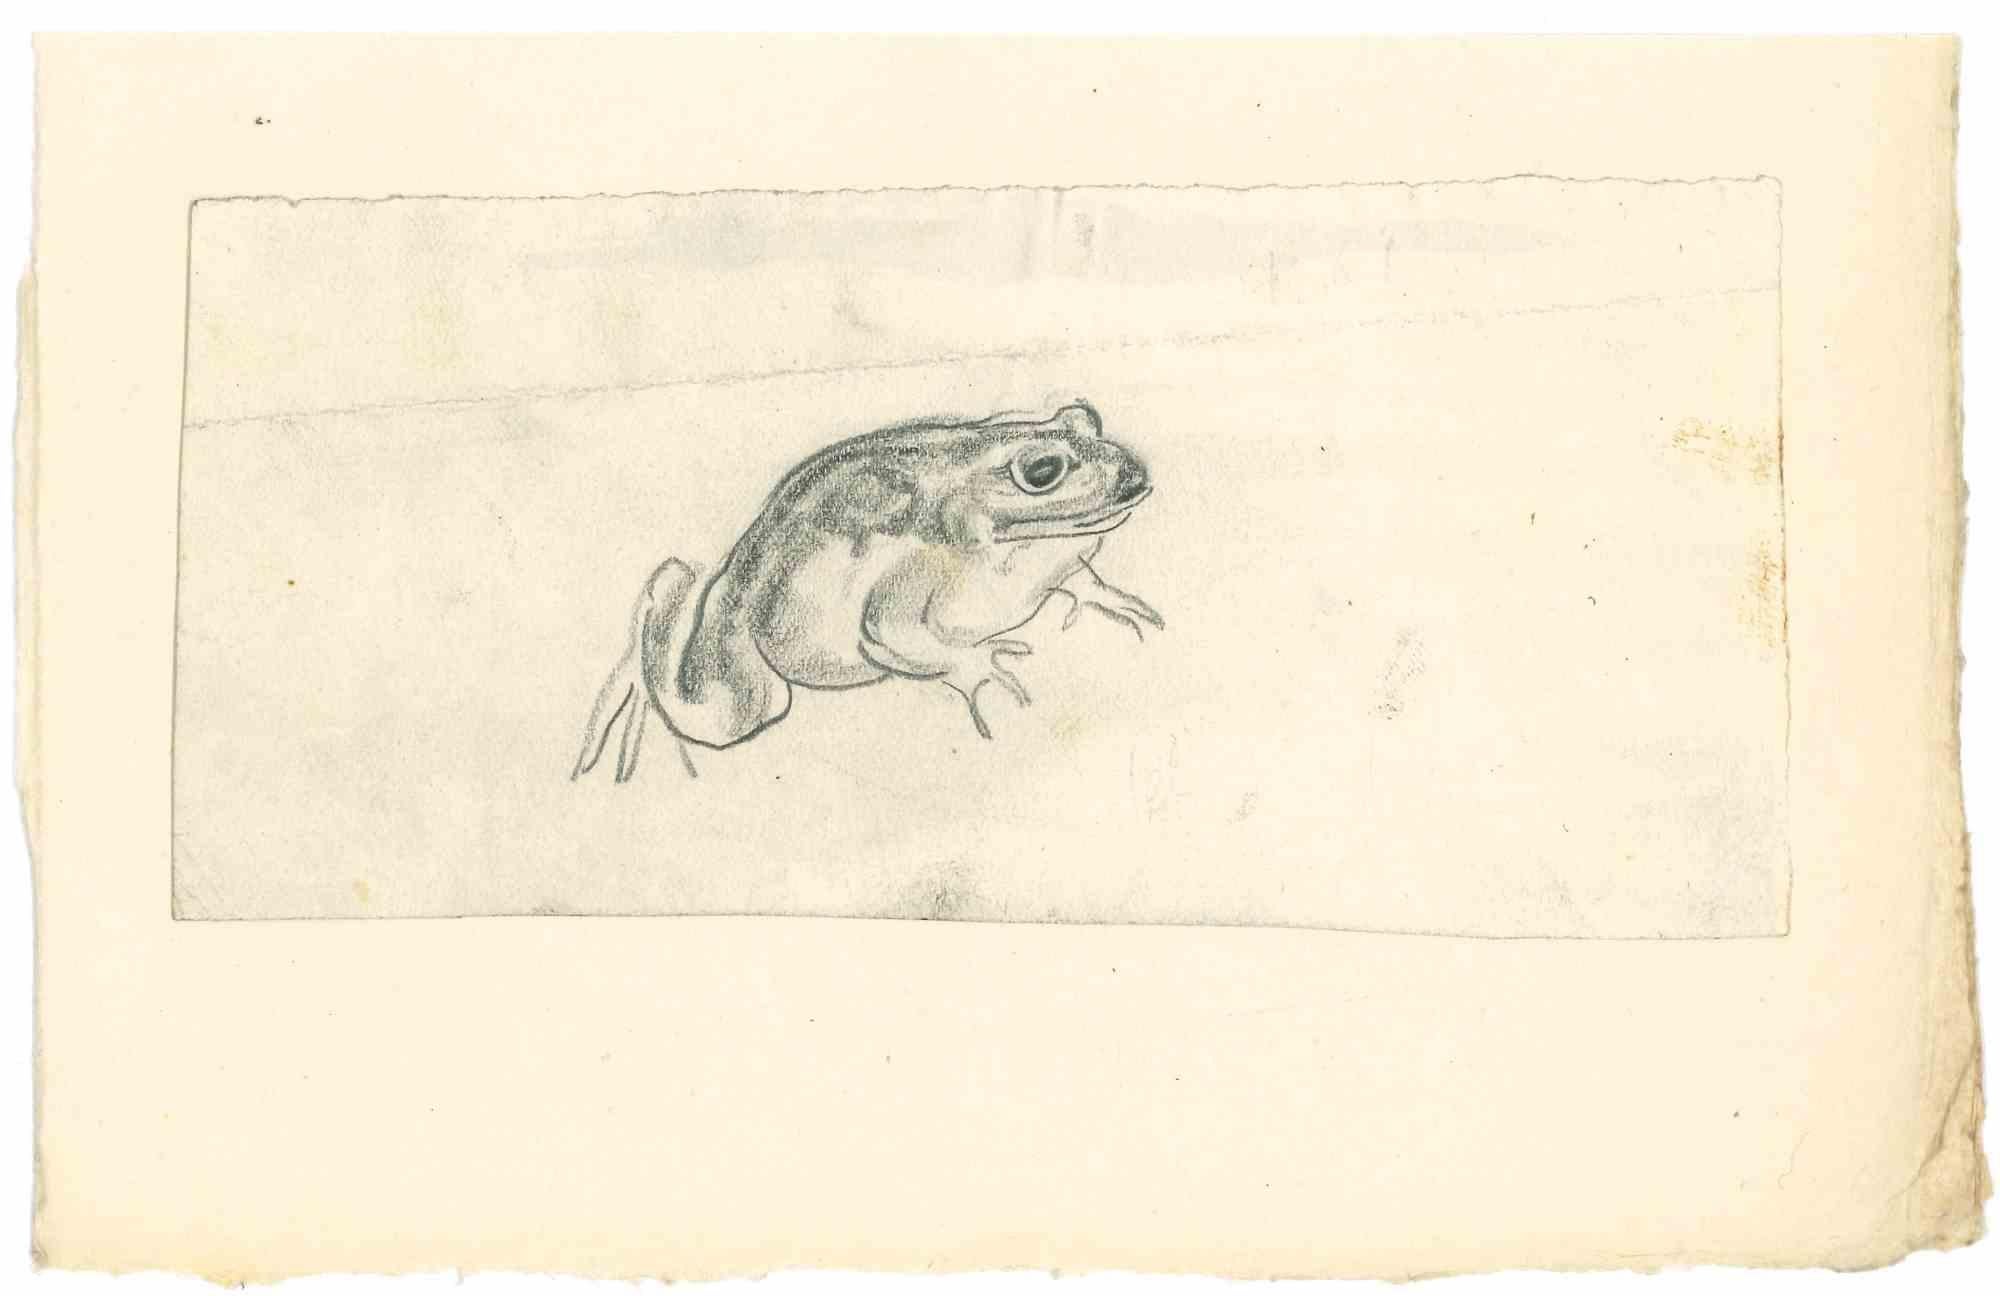 Frog is a  drawing in pencil realized in the early 1930s by Emmanuel Gondouin, (Versailles, 1883 - Parigi, 1934) 
 
The artwork is depicted through strong strokes.
 
Emmanuel Gondouin is a French Cubist painter born in Versailles in 1883 and died in